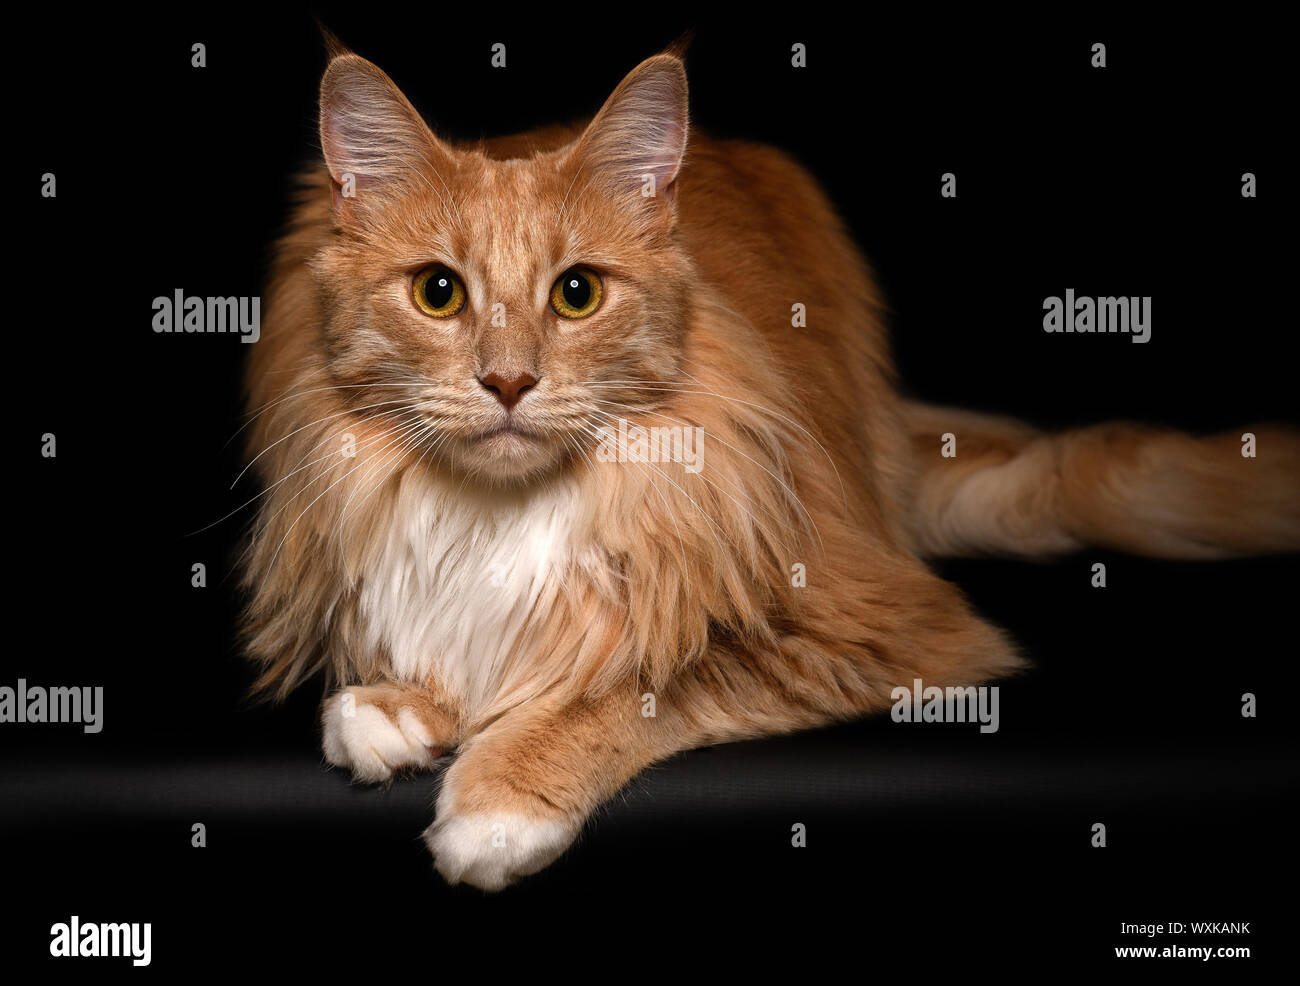 Portrait of a Maine Coon cat Stock Photo